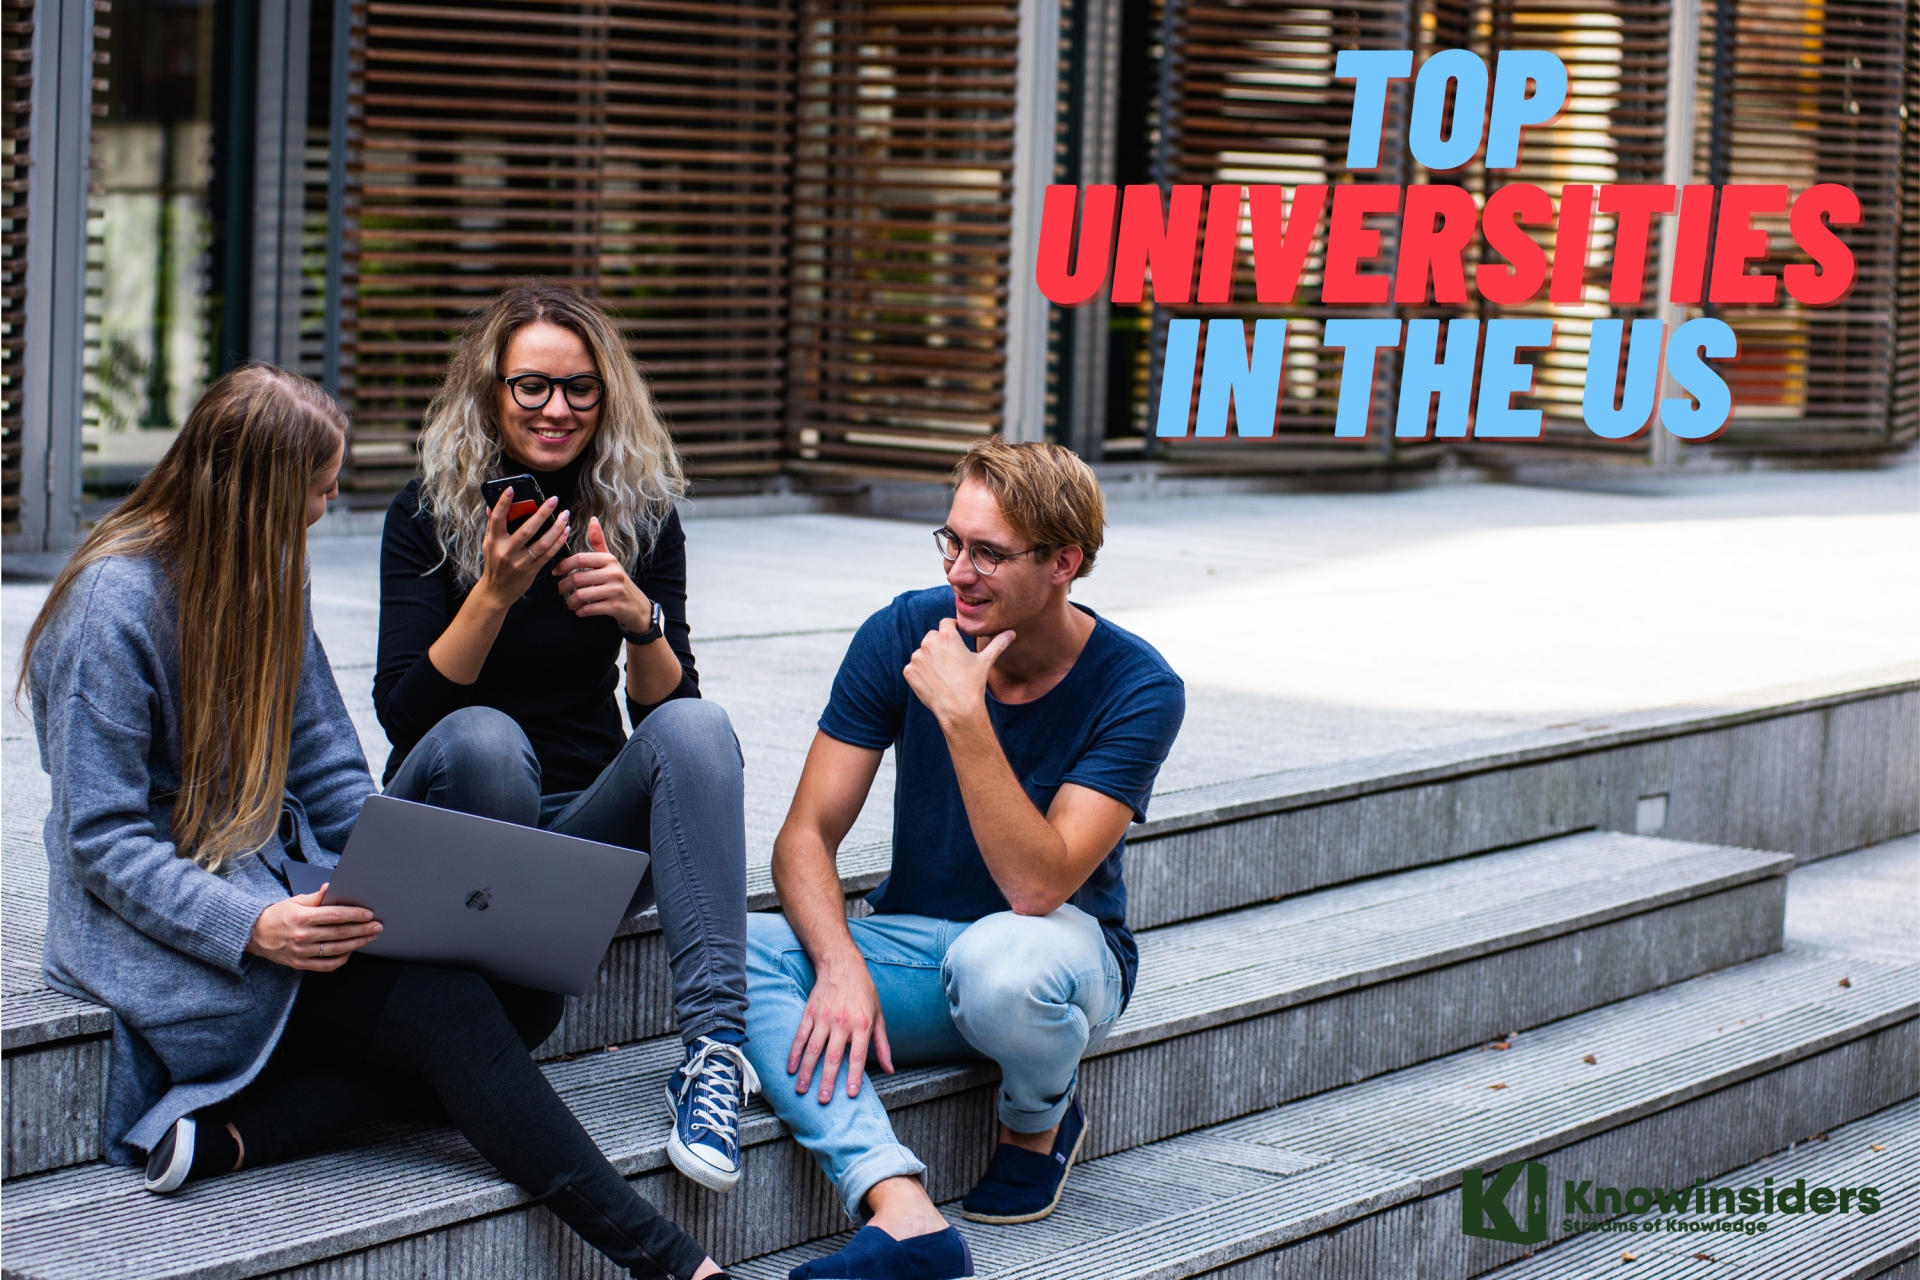 Top 9 Best Universities In The US for 2022 | KnowInsiders